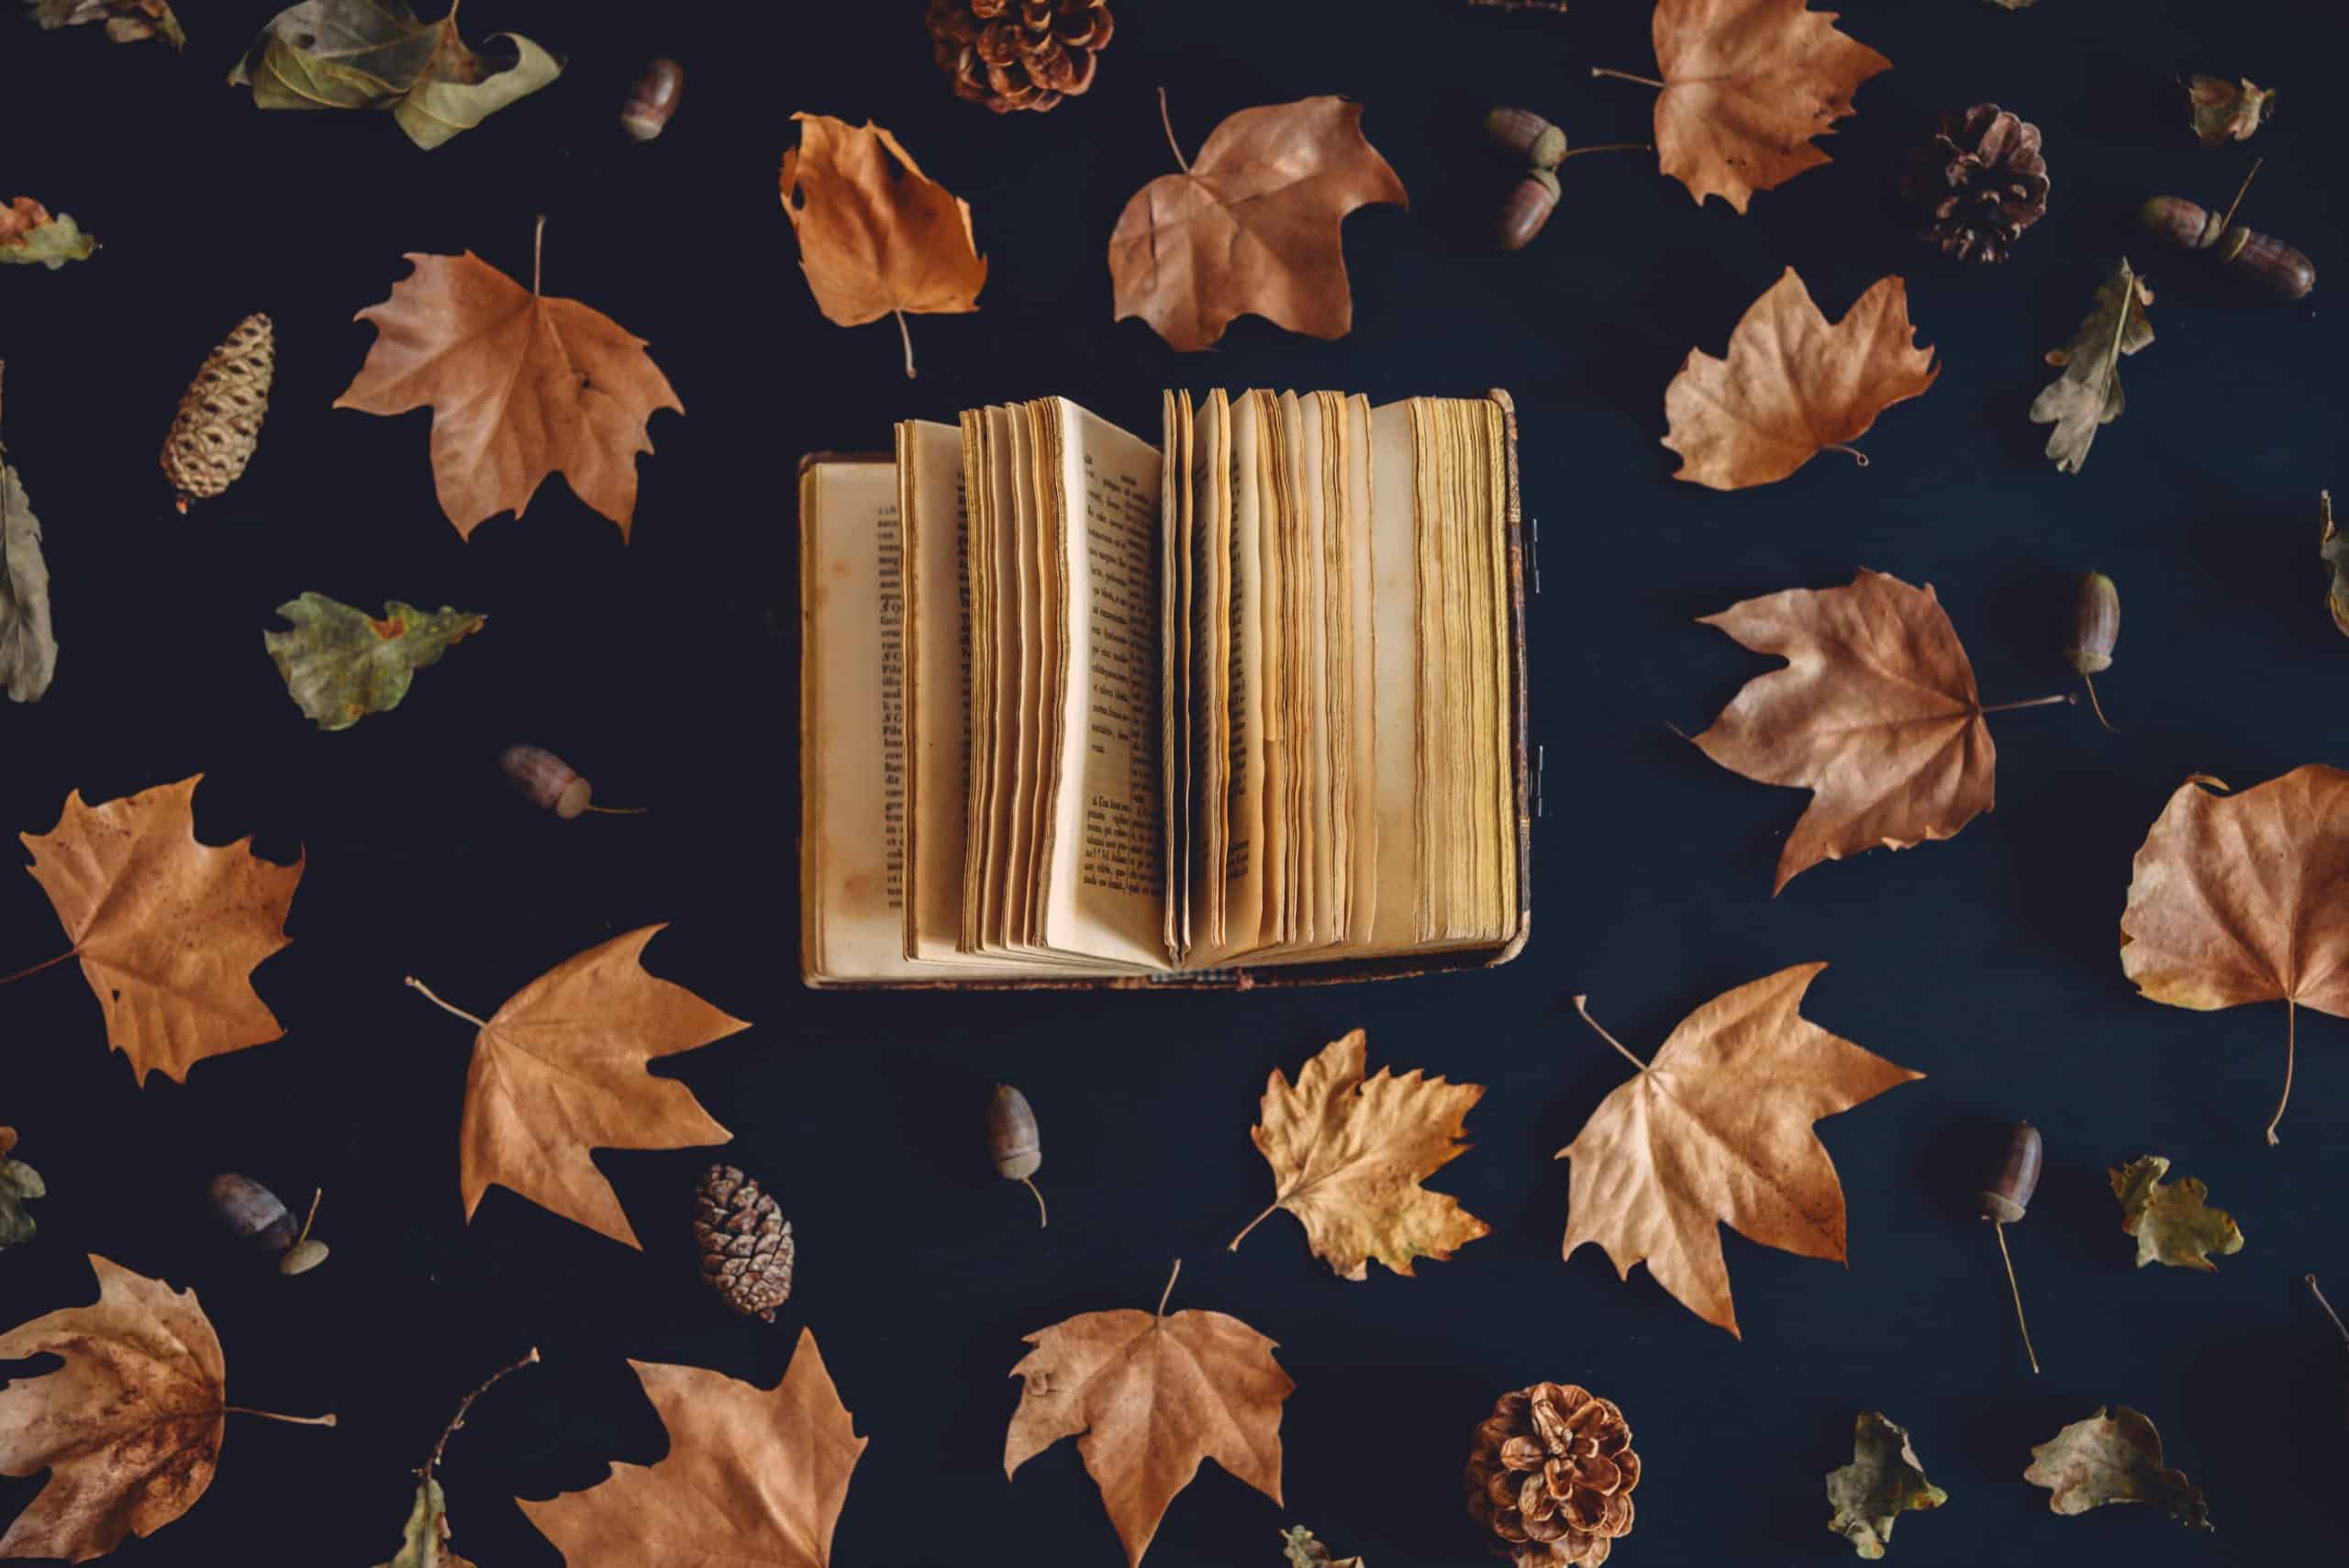 Vintage book and autumn maple leaves on dark background.